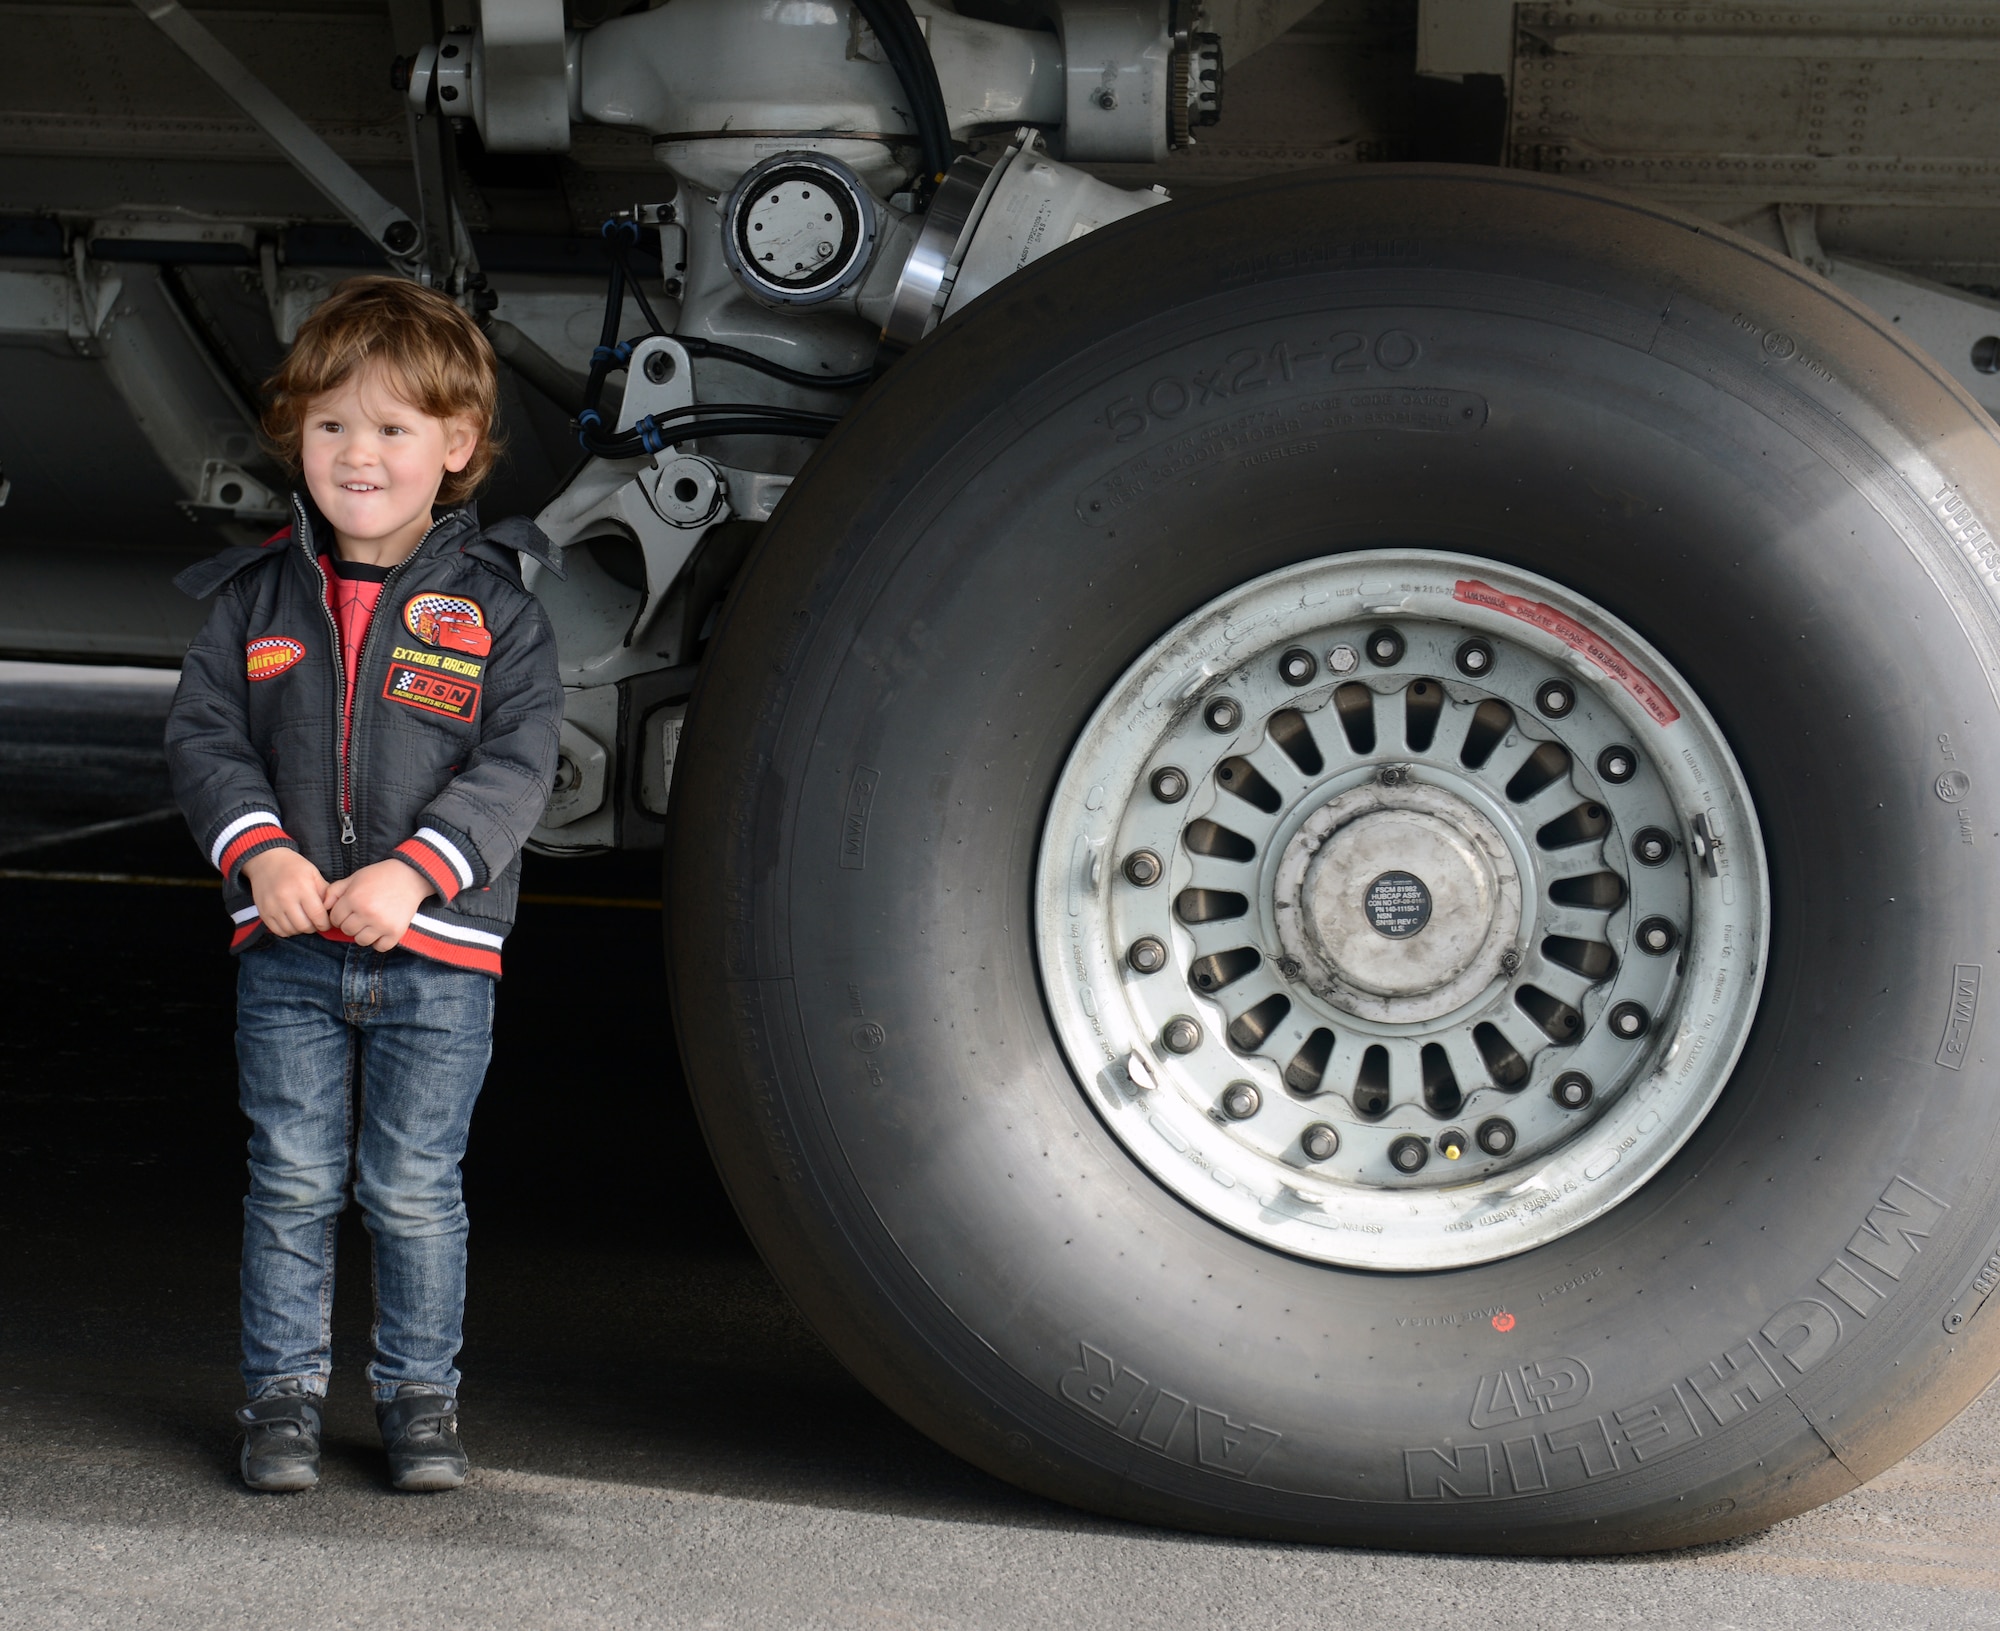 A young New Zealand boy poses for a photo beside the tire of a C-17 Globemaster III, Oct. 5th, 2014, as part of the U.S. Antarctic Program Day for IceFest 2014 at Christchurch, New Zealand. Children had a chance to walk around the aircraft and ask questions of the 62nd and 446th Airlift Wing Airmen who participated in this year’s event. (U.S. Air Force photo/Master Sgt. Todd Wivell)